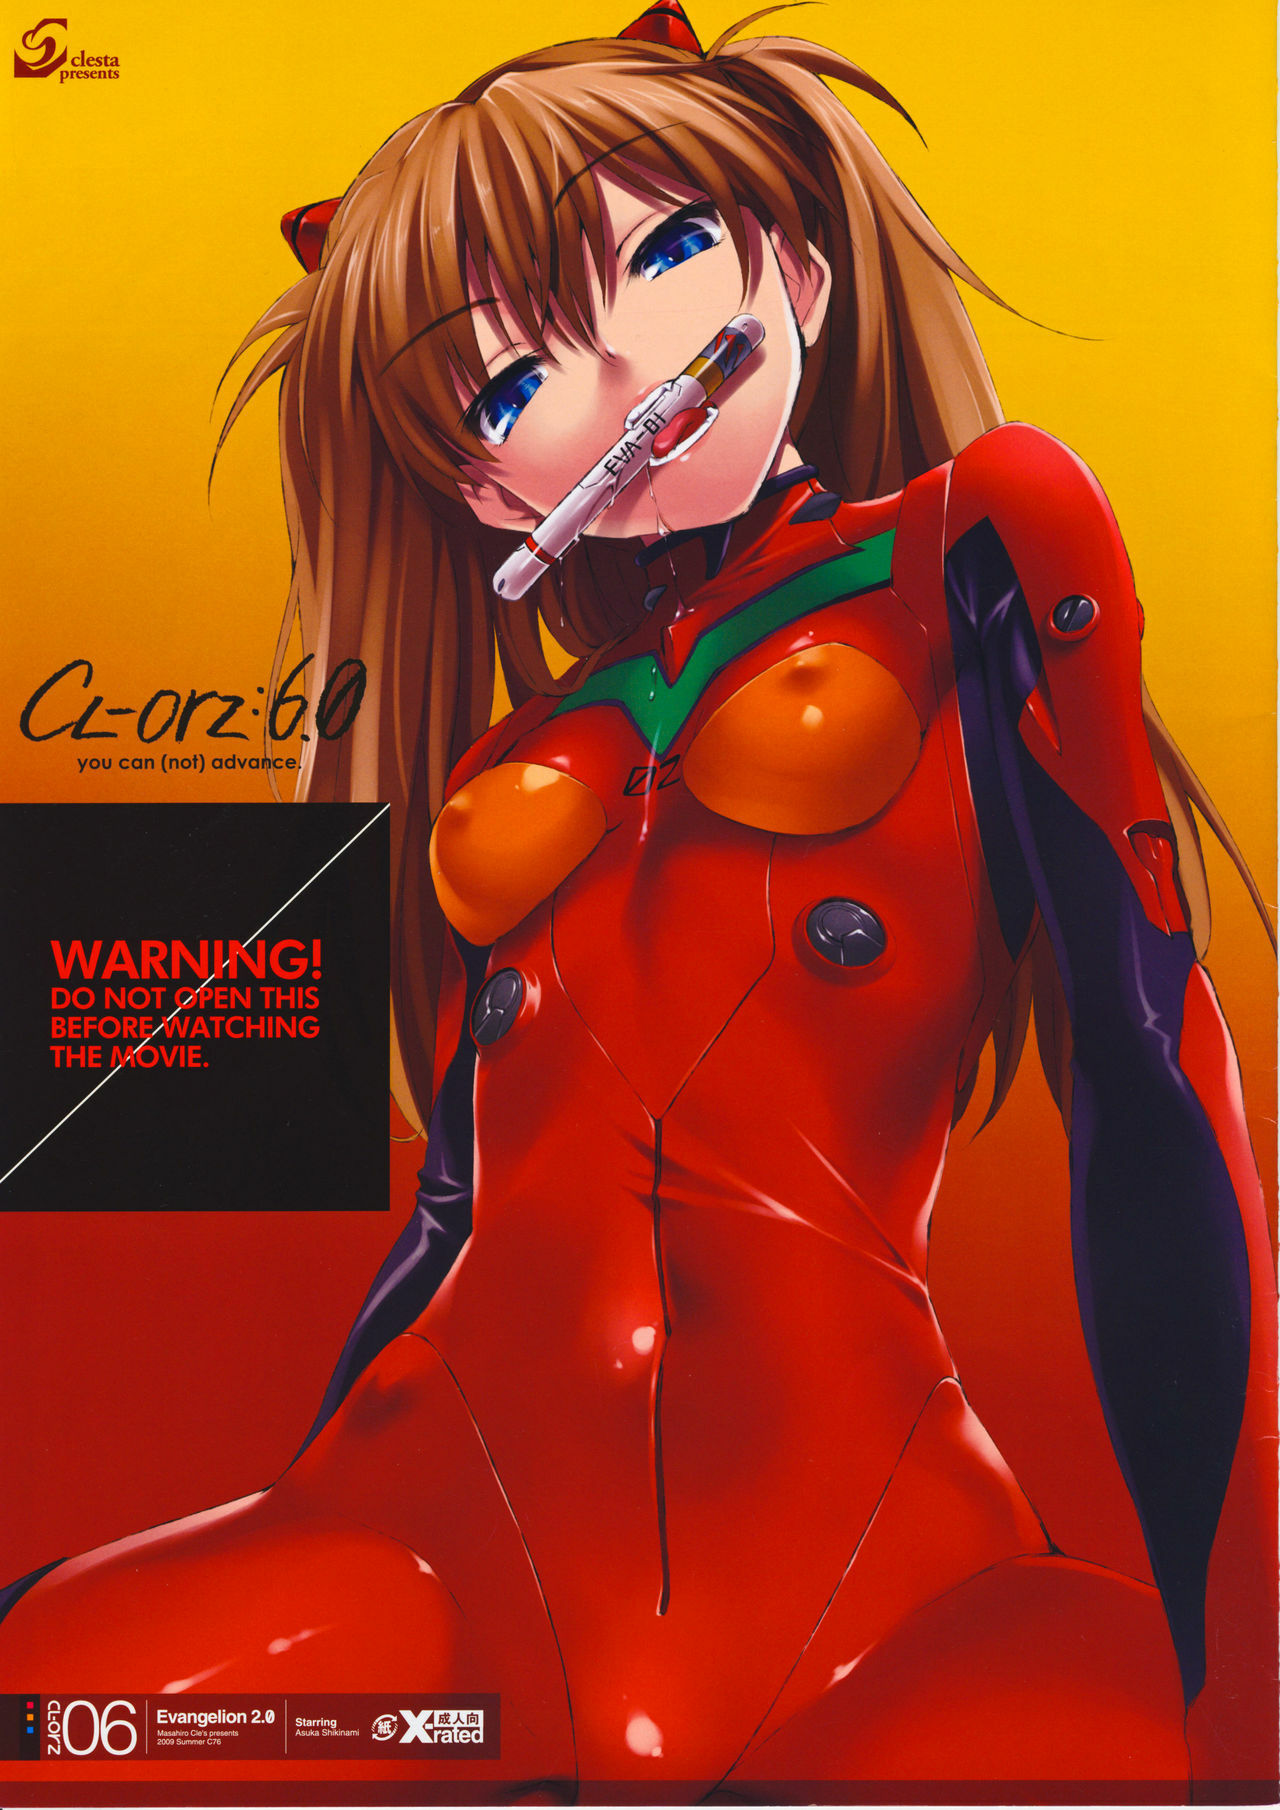 (C76) [Clesta (Cle Masahiro)] CL-orz 6.0 you can (not) advance. (Rebuild of Evangelion) [Decensored] page 1 full